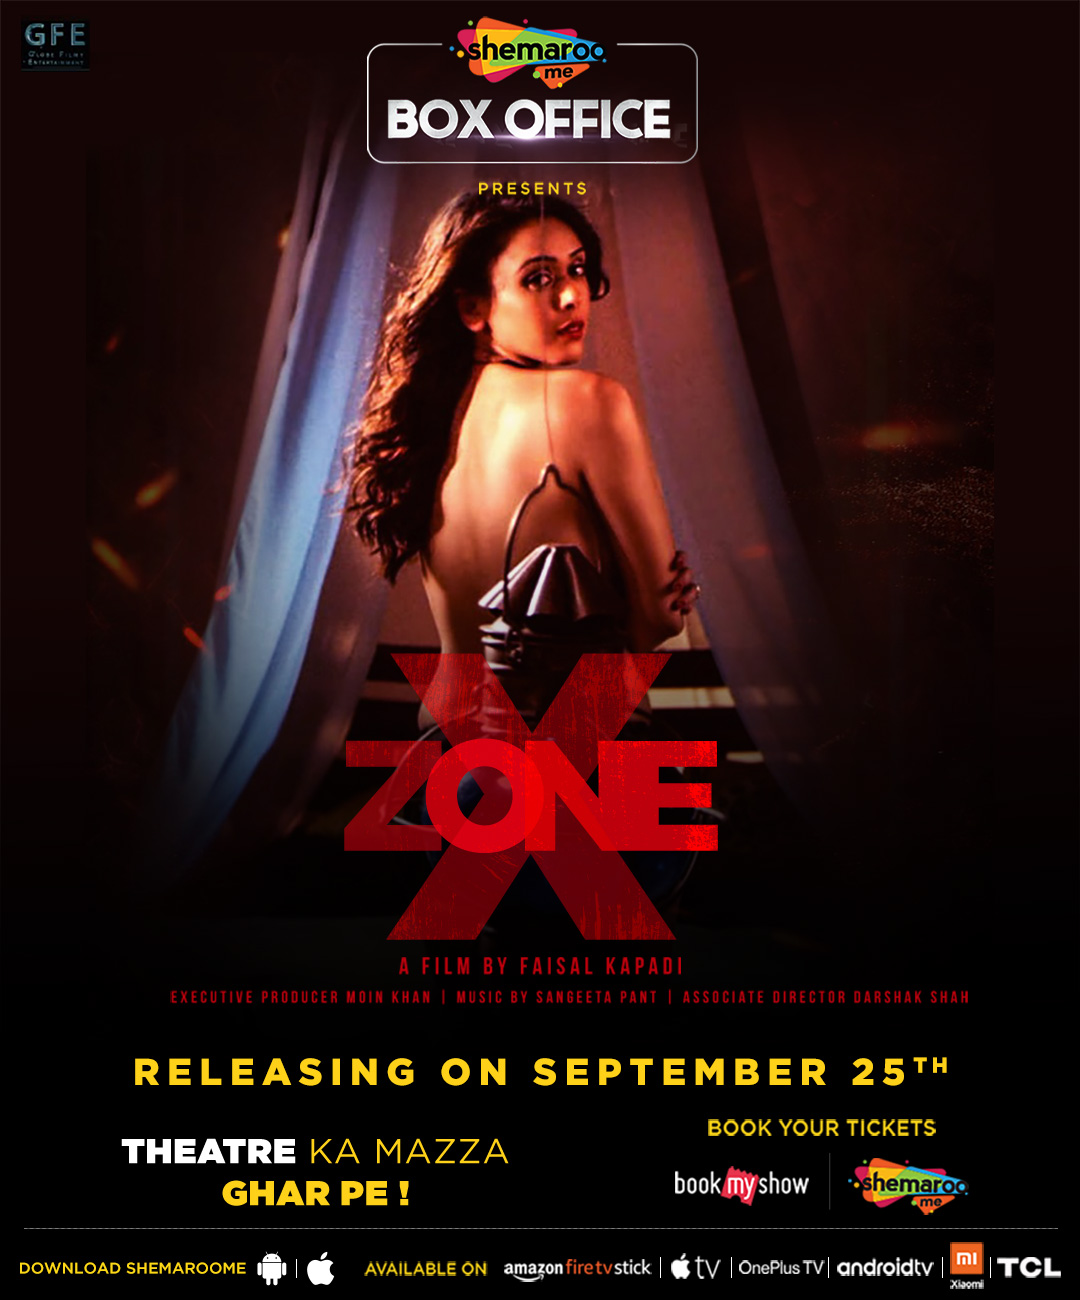 Mumbai News Network Latest News Shemaroome Box Office Turns Up The Fear Quotient With Their Next Release X Zone